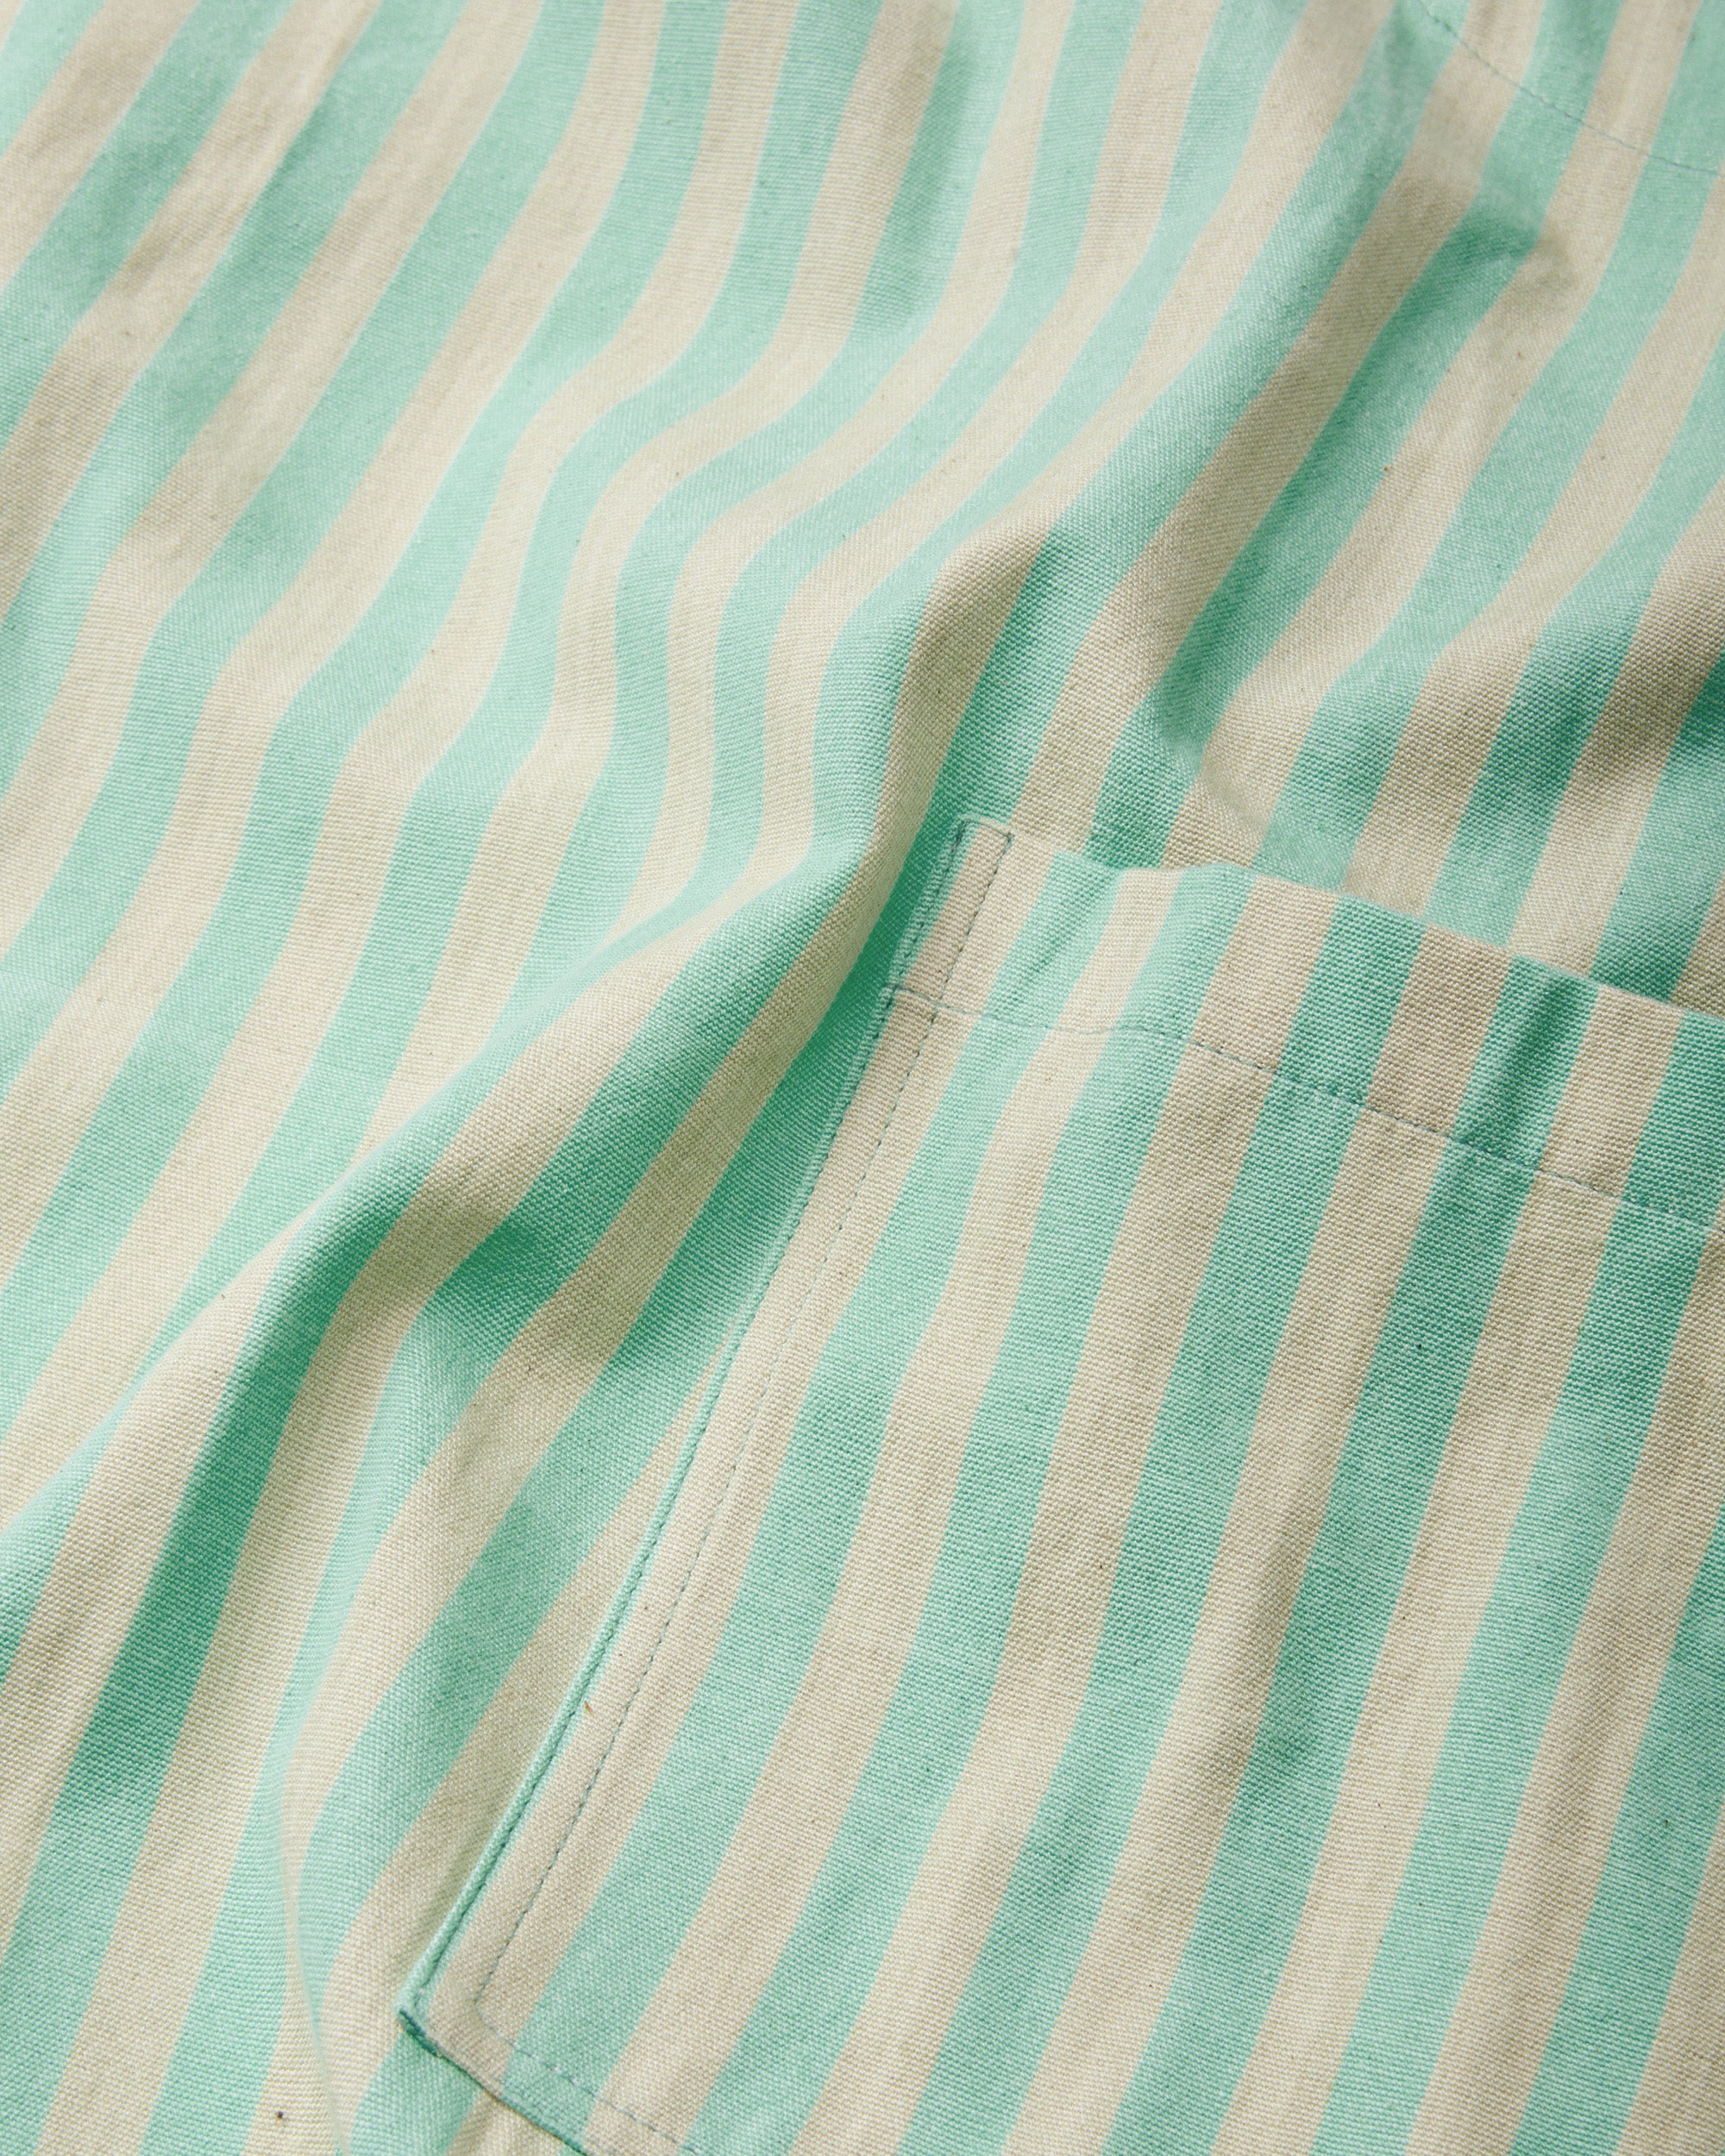 close-up detail ethically handwoven cotton fabric for MINNA Utility Apron, mint and light green stripe